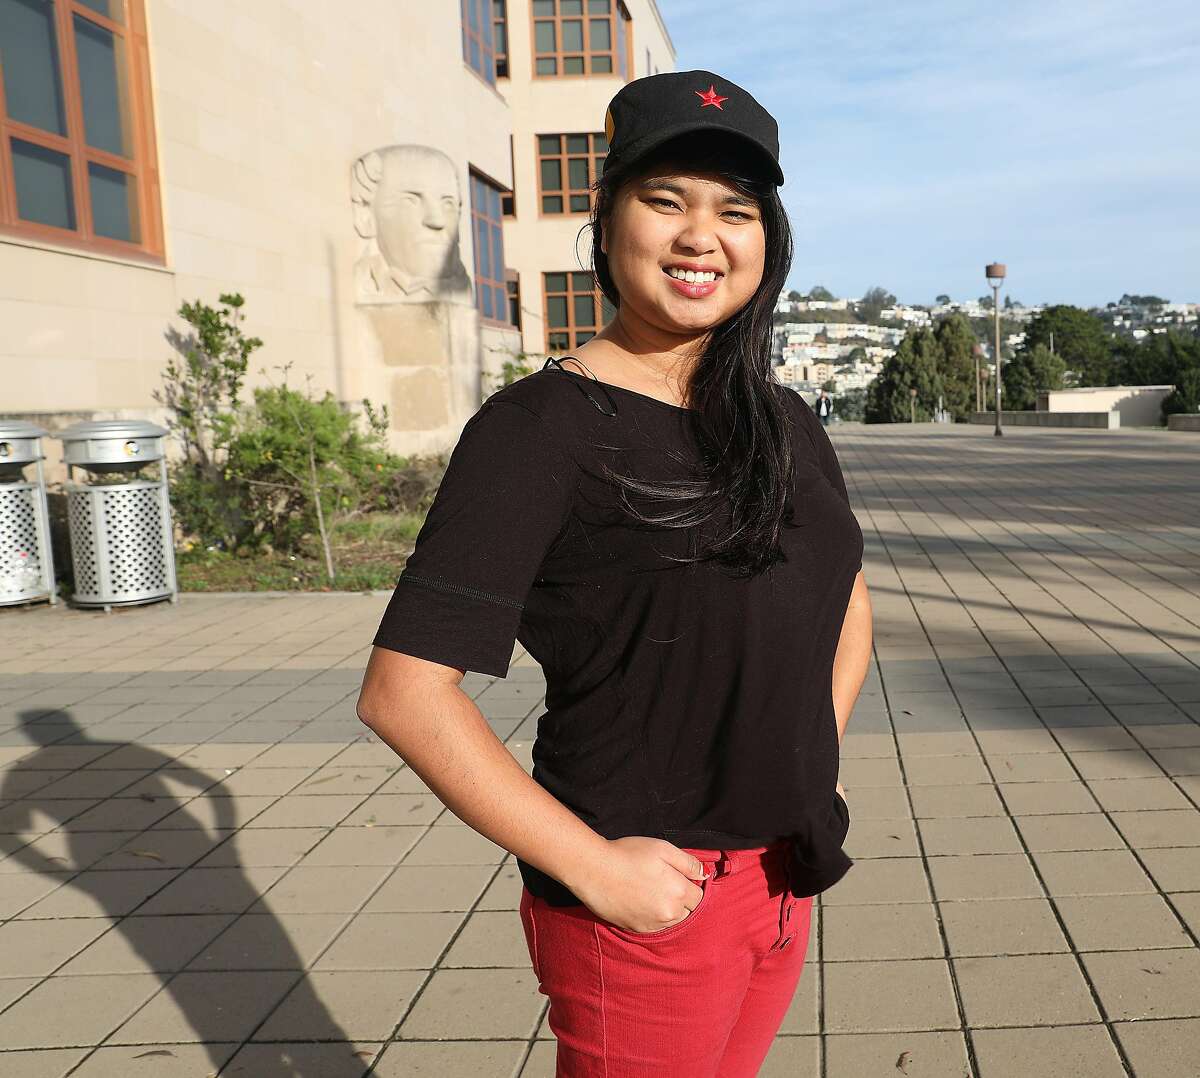 Win-Mon Kyi, a City College of San Francisco student and community organizer, has been working to try to get the Free City program extended. Click through to see the world's top 25 universities. >>>